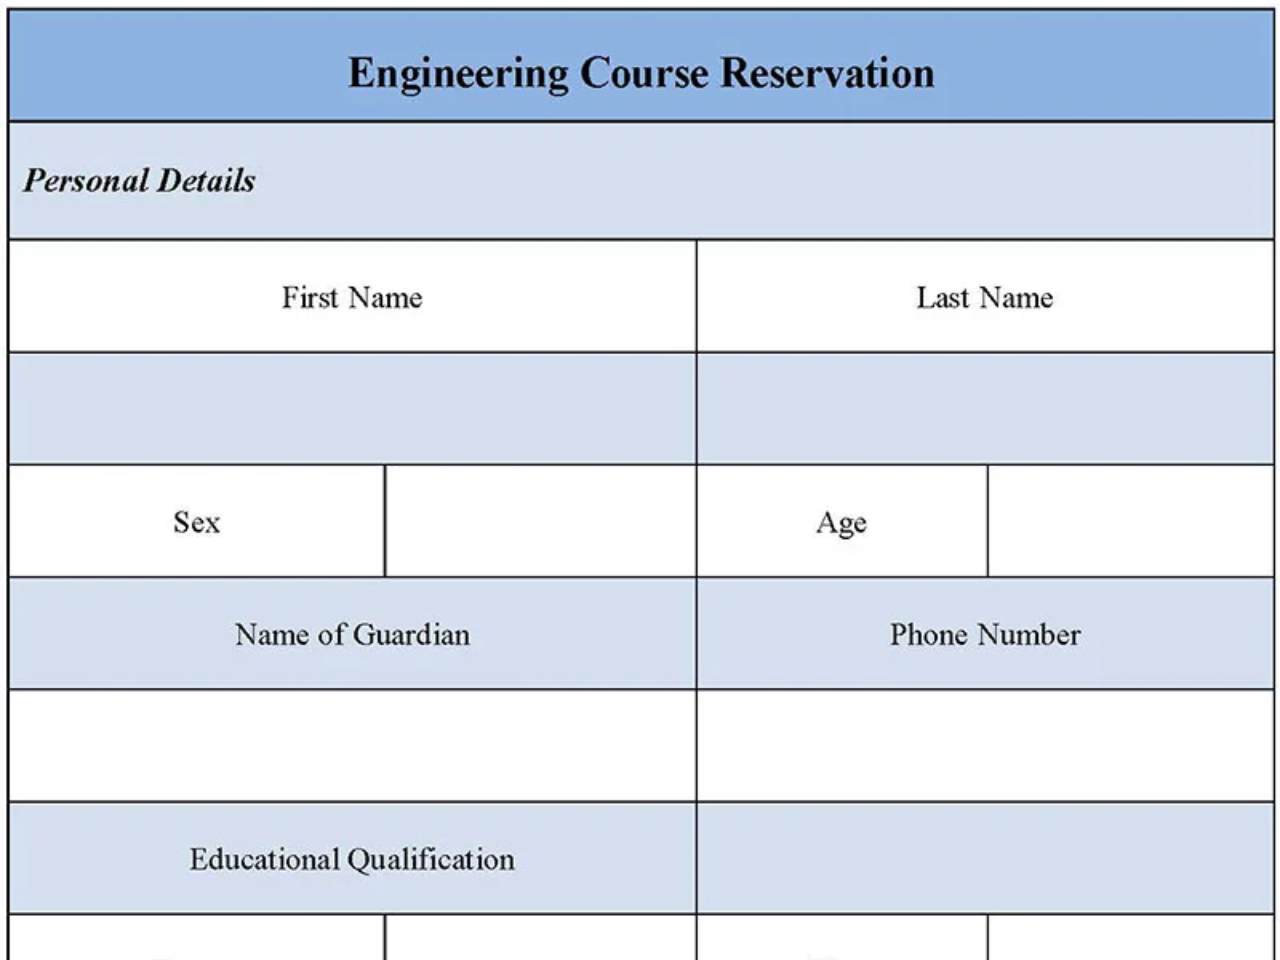 Engineering Course Reservation Form